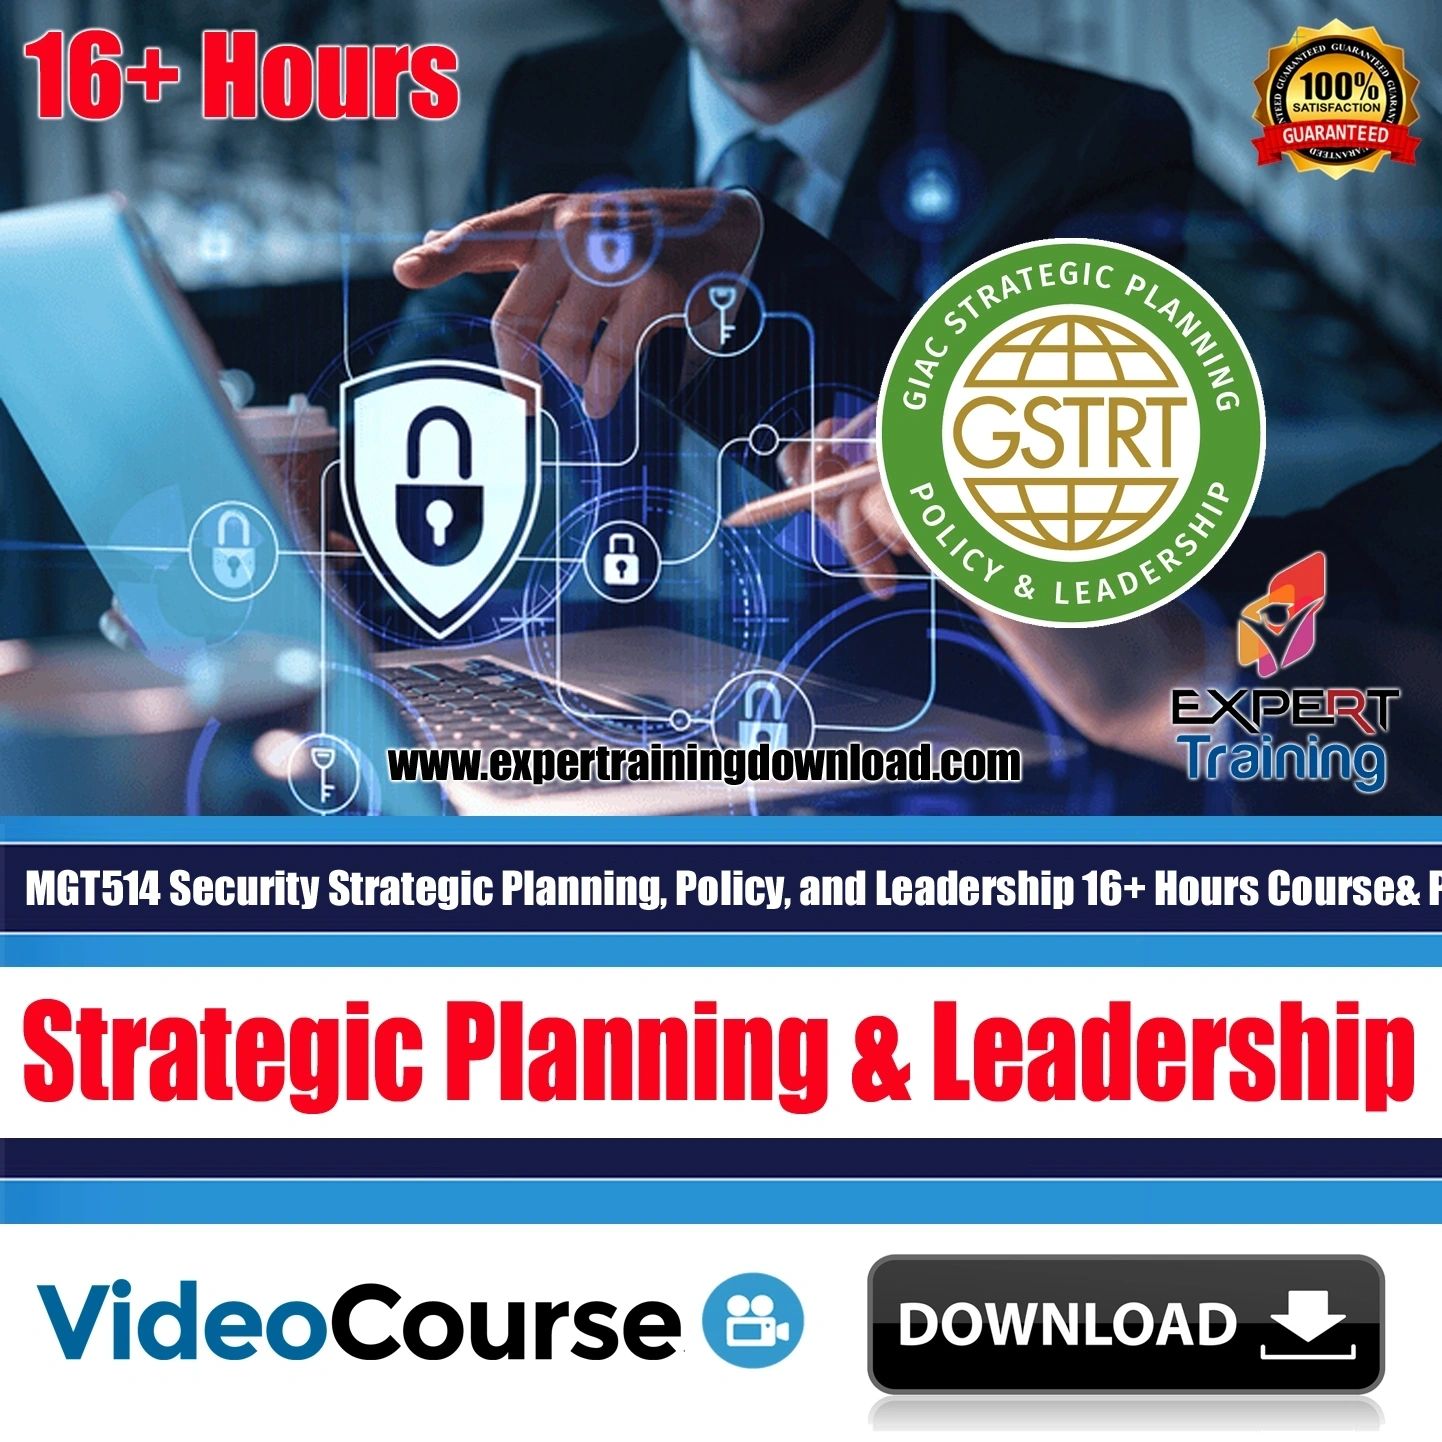 MGT514 Security Strategic Planning, Policy, and Leadership 16+ Hours Course (VOD, MP3, PDF )